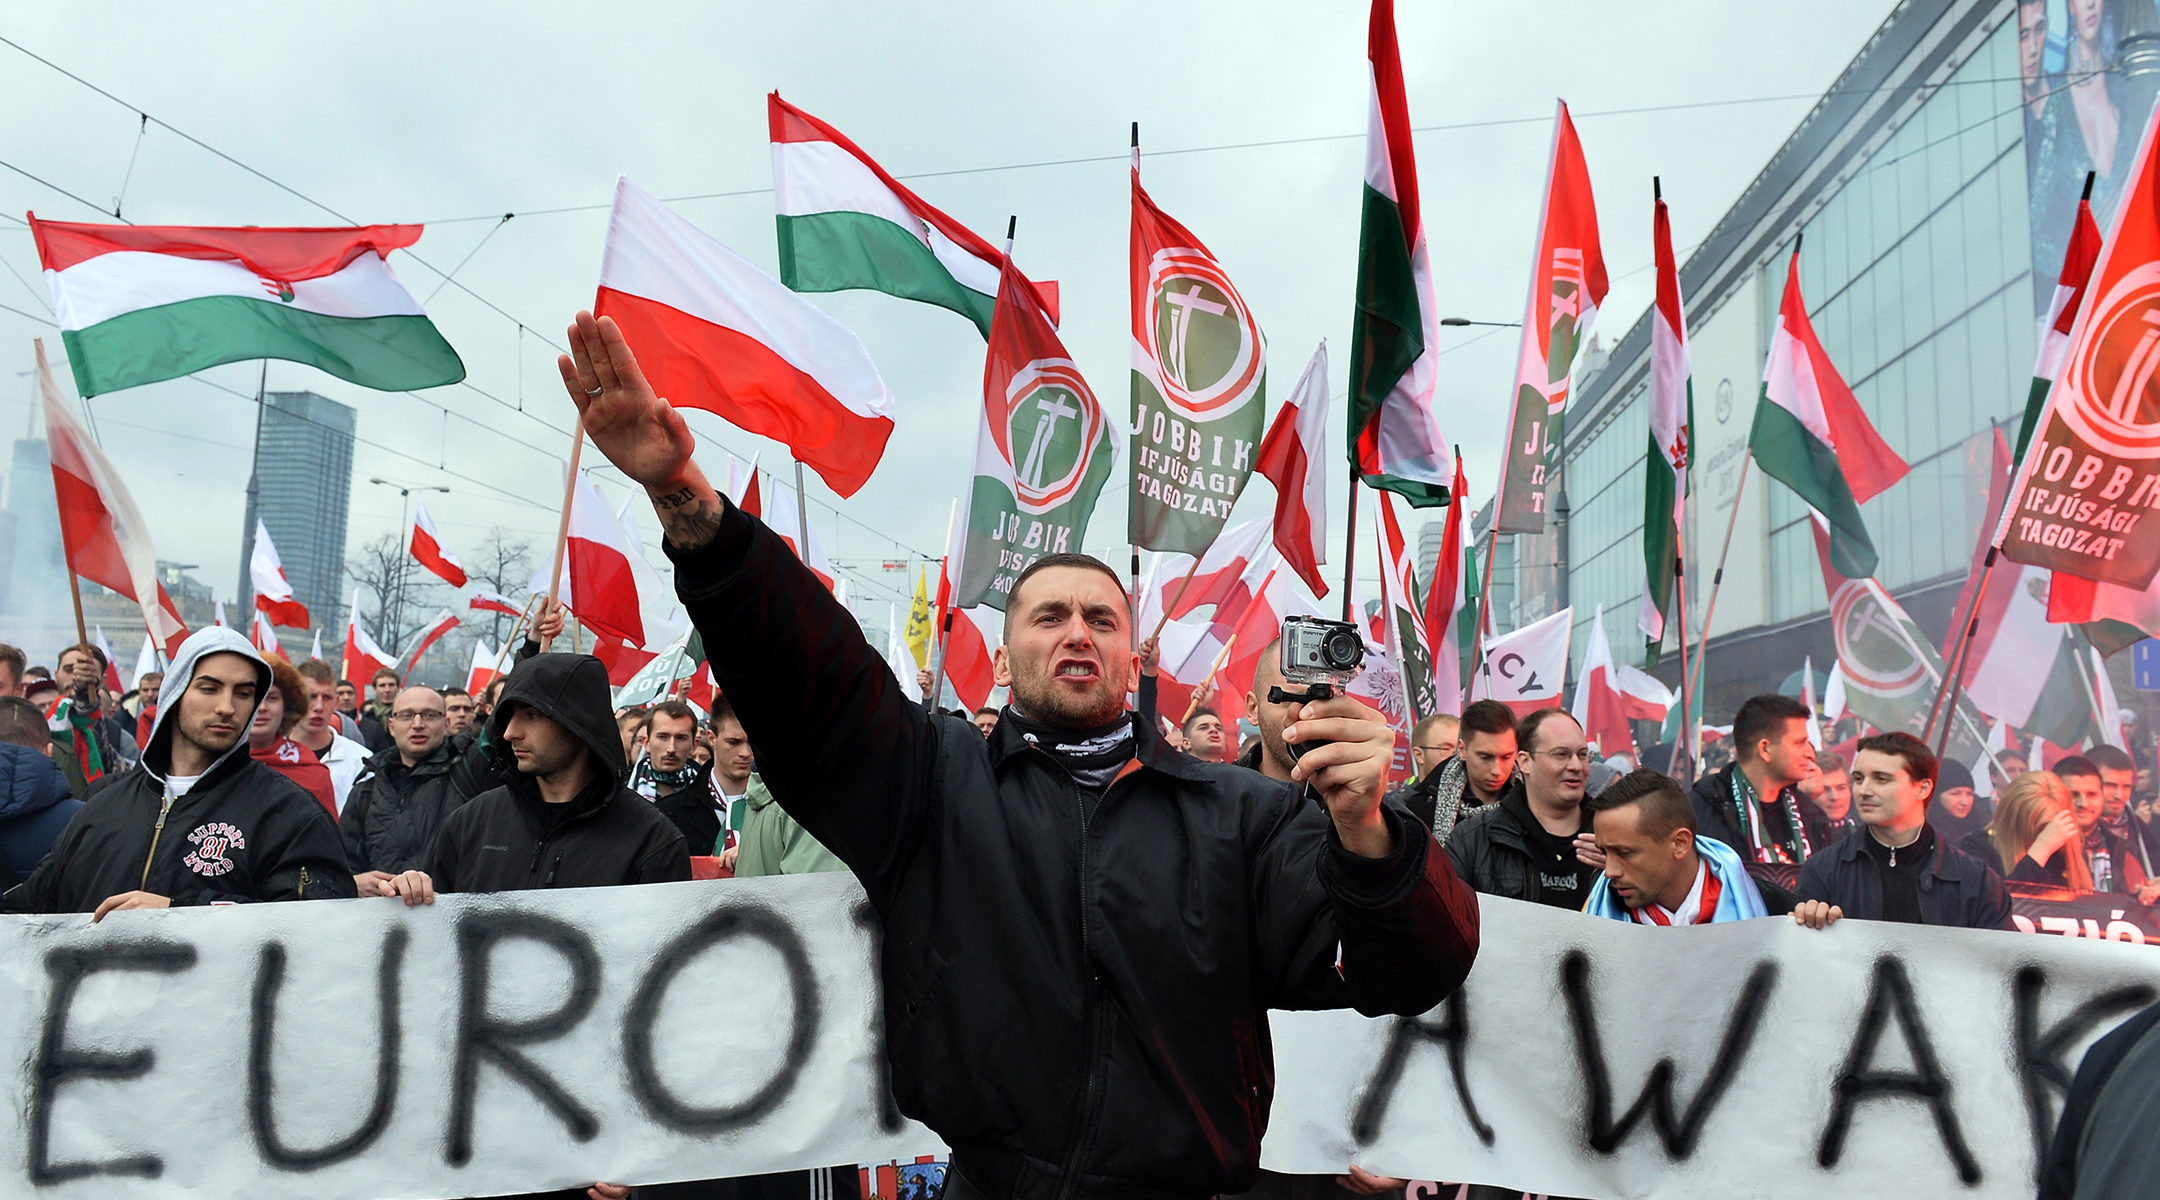 Hungarian supporters of the far-right Jobbik party participating in a nationalist march through Warsaw, Poland on Nov. 11, 2015. (Janek Skarzynski/AFP/Getty Images)